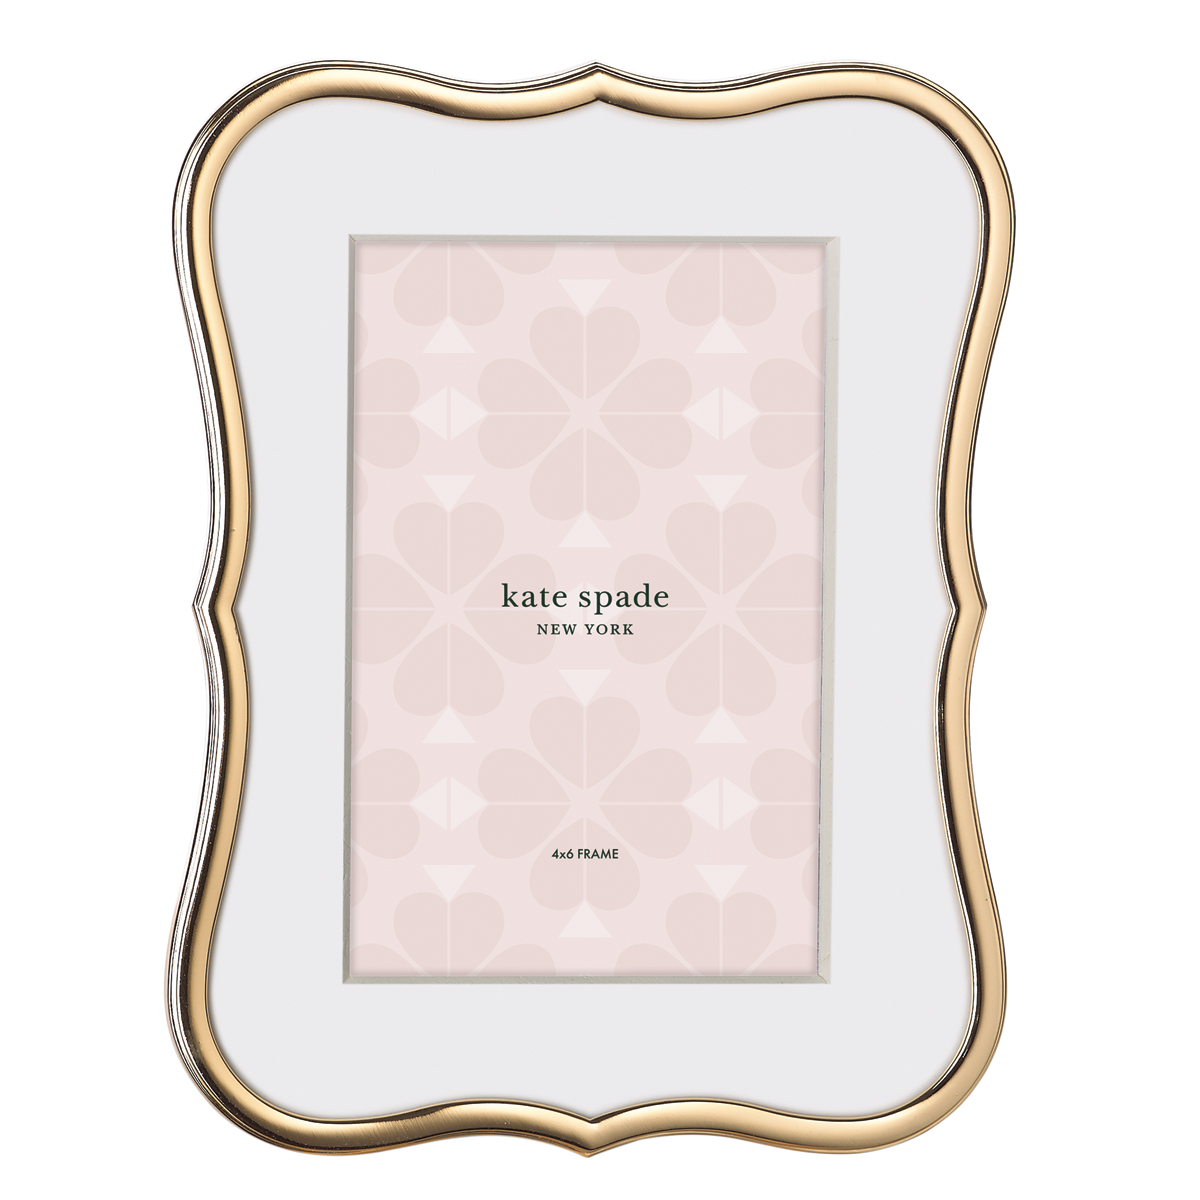 Kate Spade New York, Lenox Crown Point Gold 4x6 Metal Picture Frame